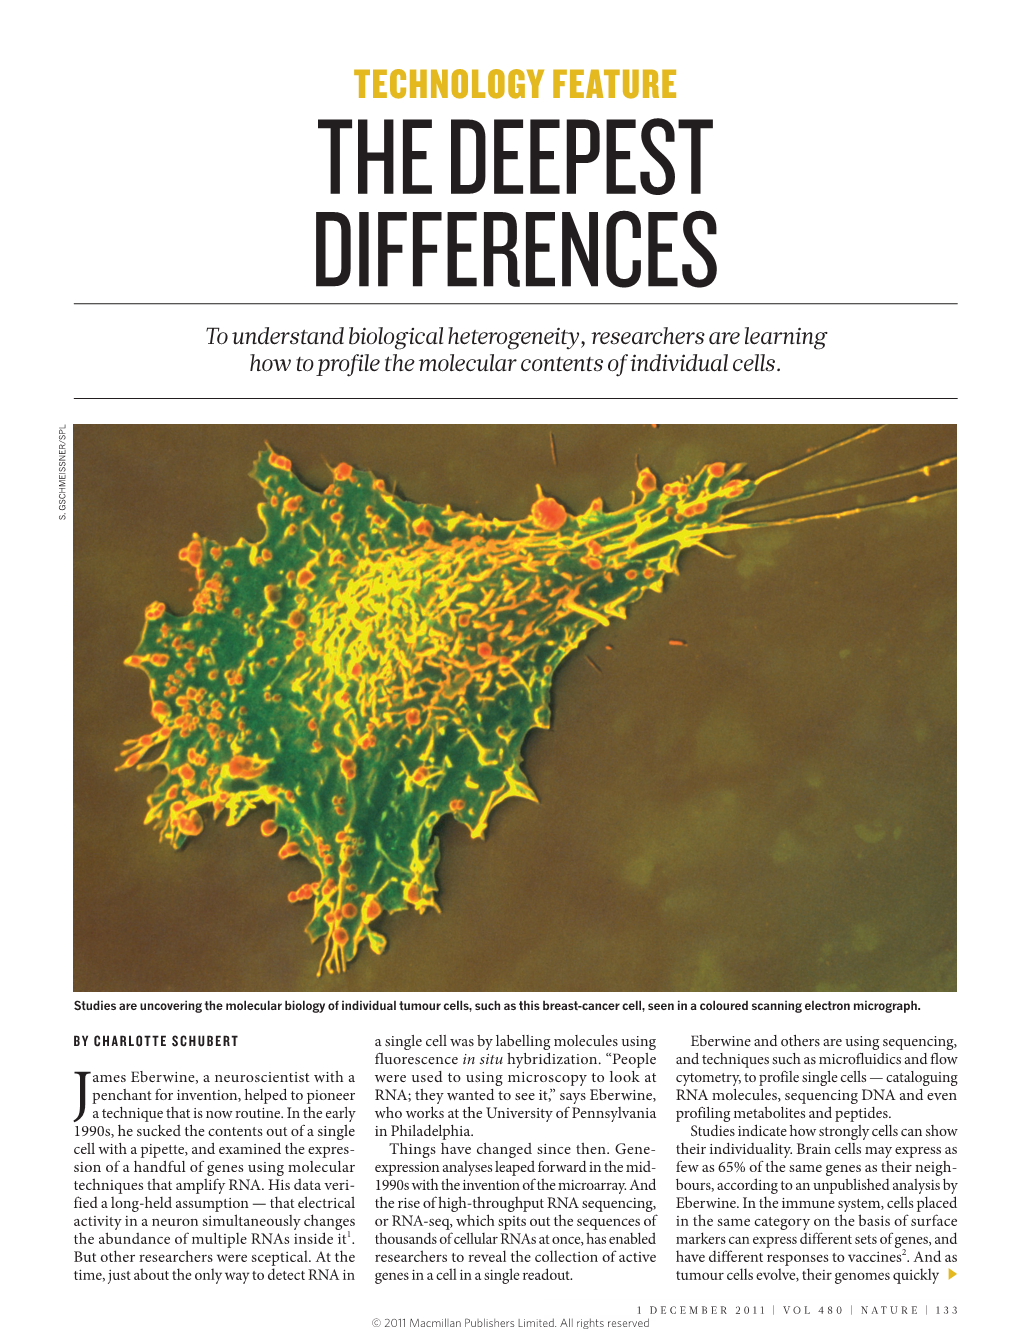 Single-Cell Analysis: the Deepest Differences